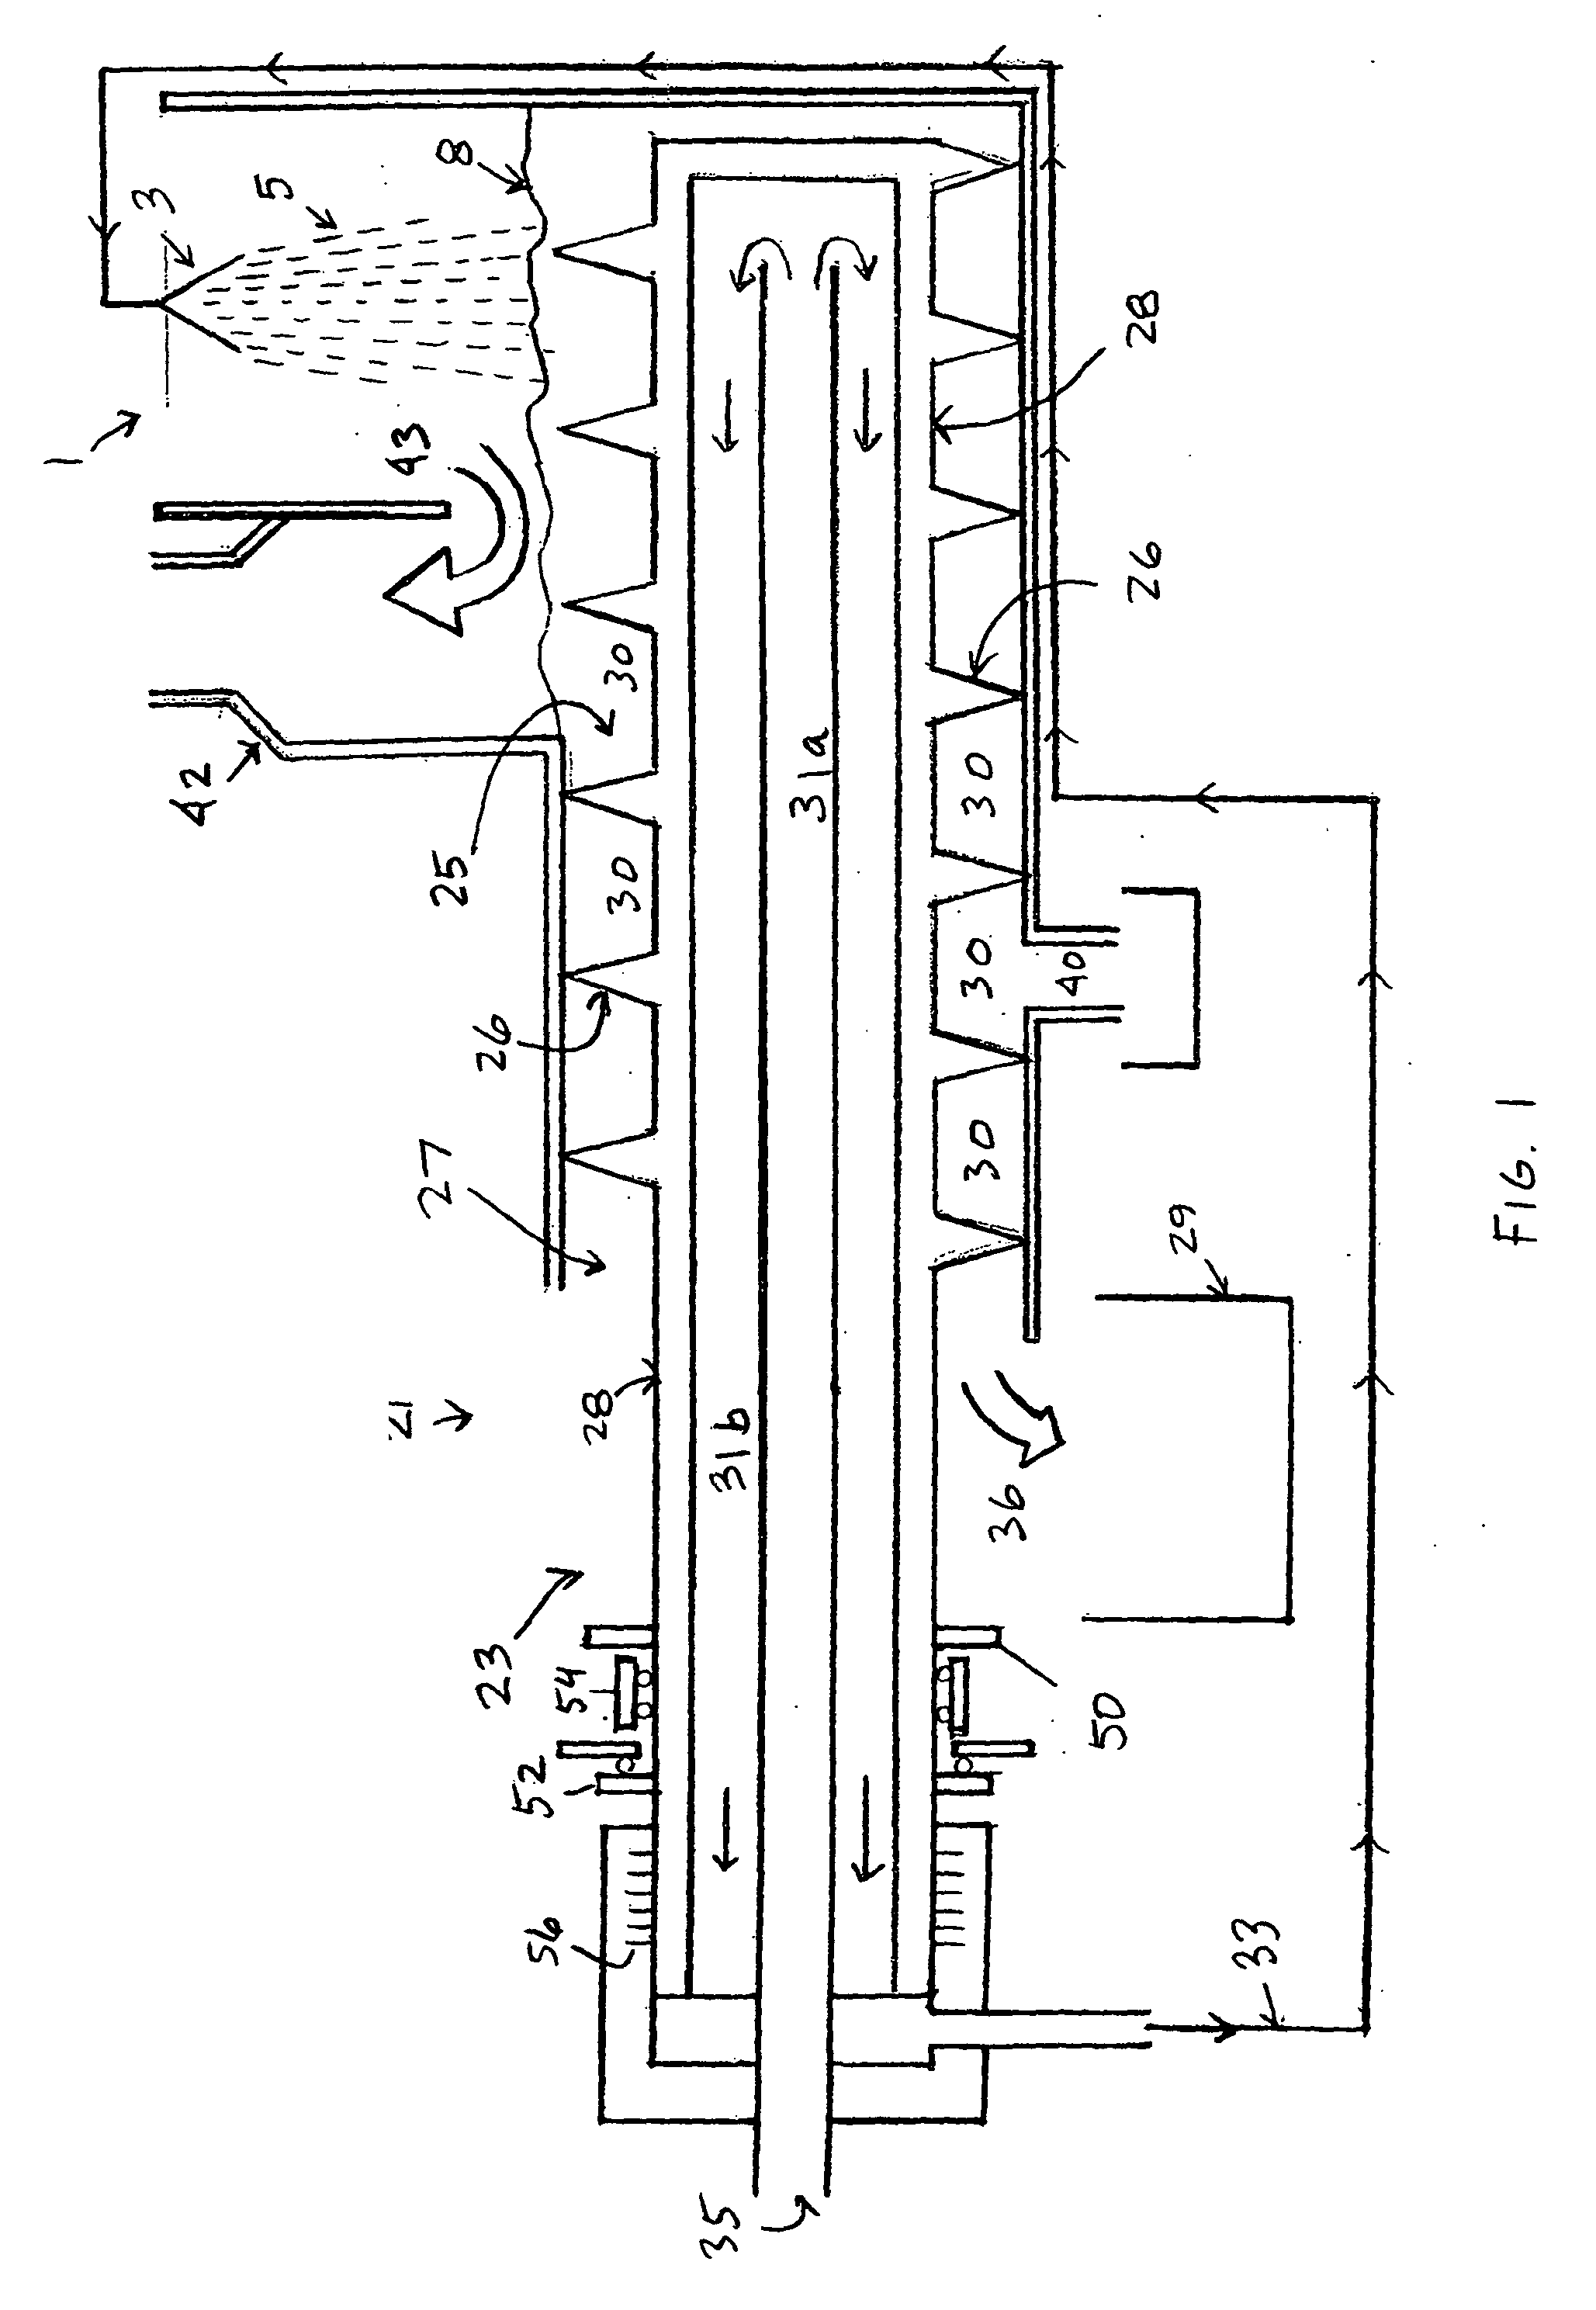 Desalination method and system using a continuous helical slush removal system